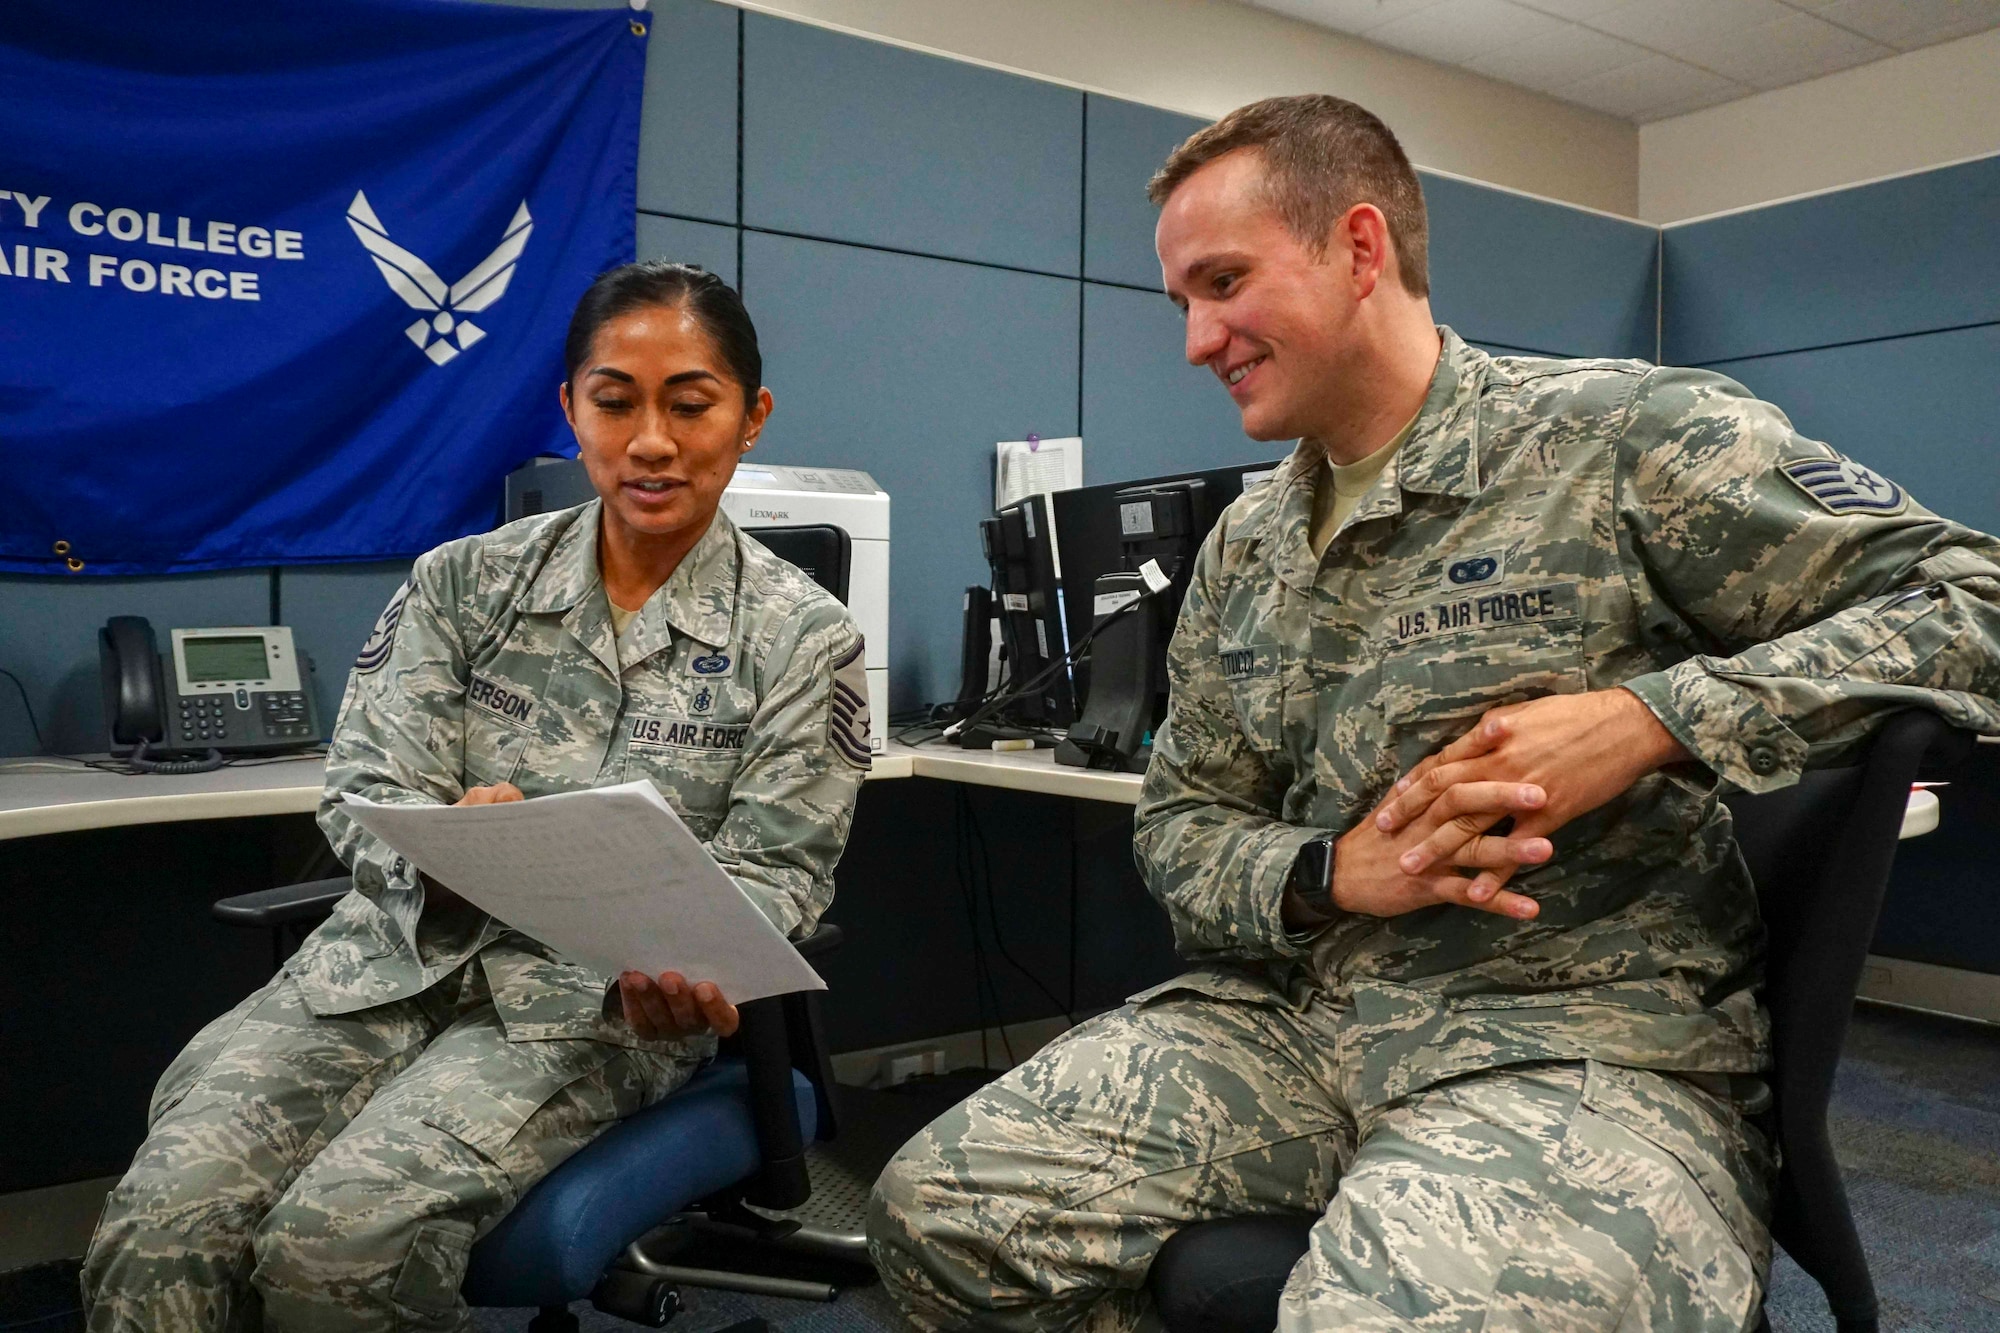 Master Sgt. Michelle Wilkerson, 419th Force Support Squadron, explains education benefits to Staff Sgt. Matthew Mattucci during a unit training assembly weekend at Hill Air Force Base, Utah